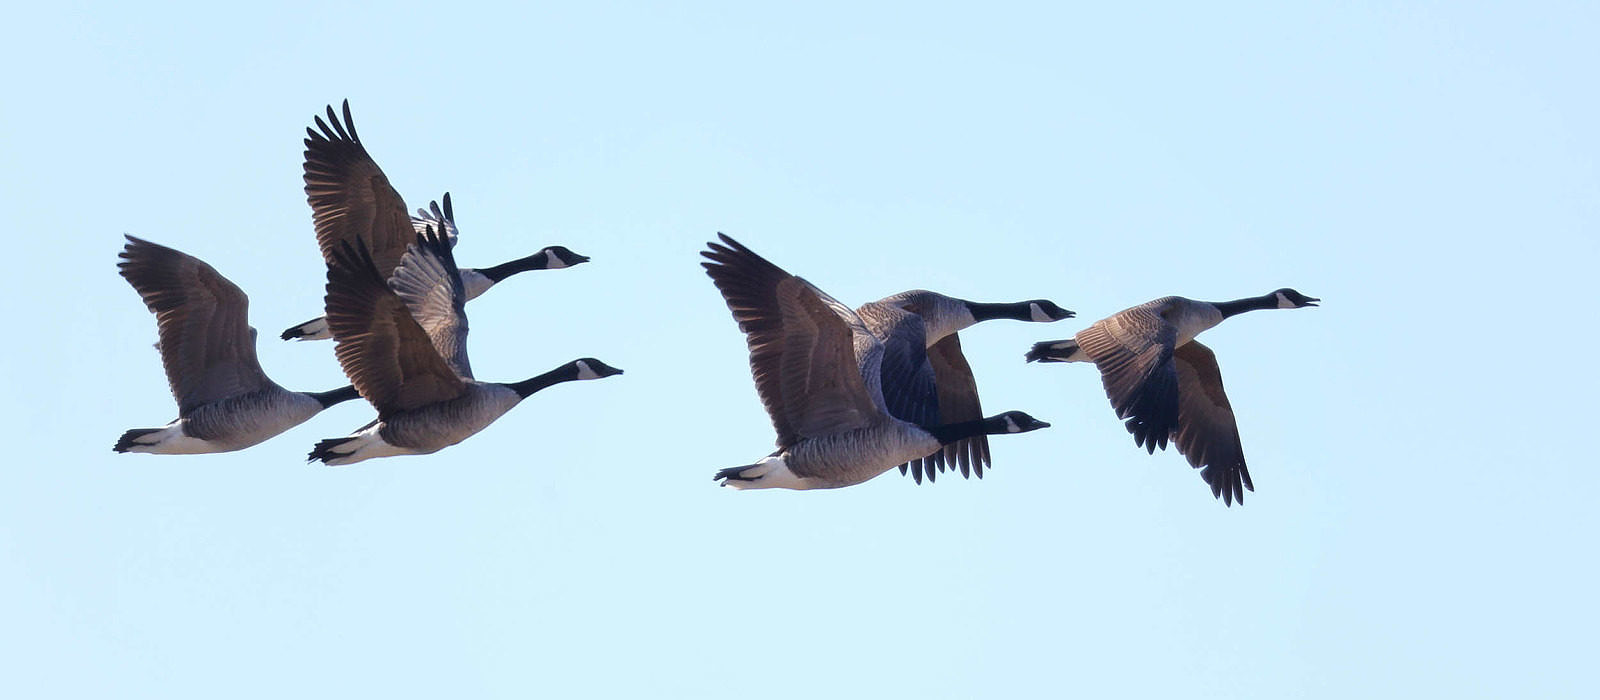 A flock of Canada Geese in flight against a light blue sky. (photo © Andre Moraes / raven.digital)